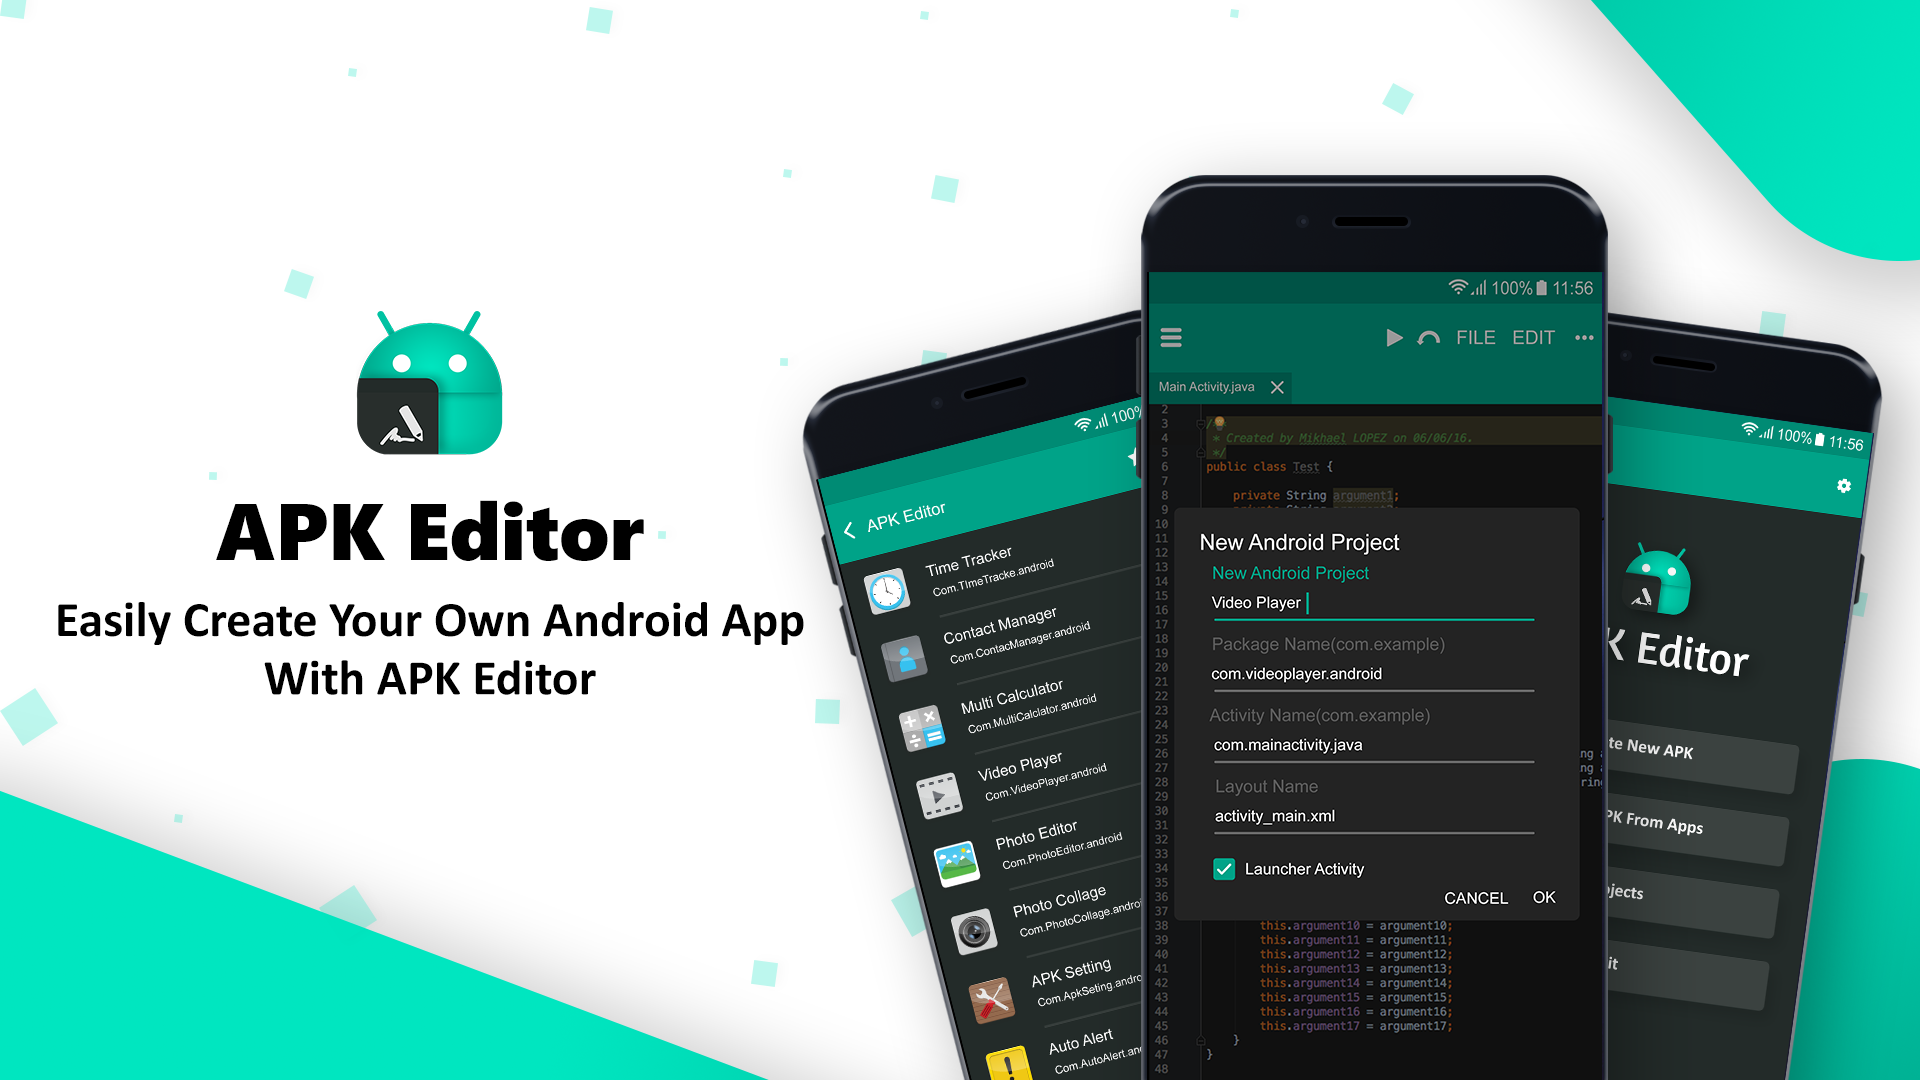 APK Editor APK 1.0 for Android – Download APK Editor APK Latest Version